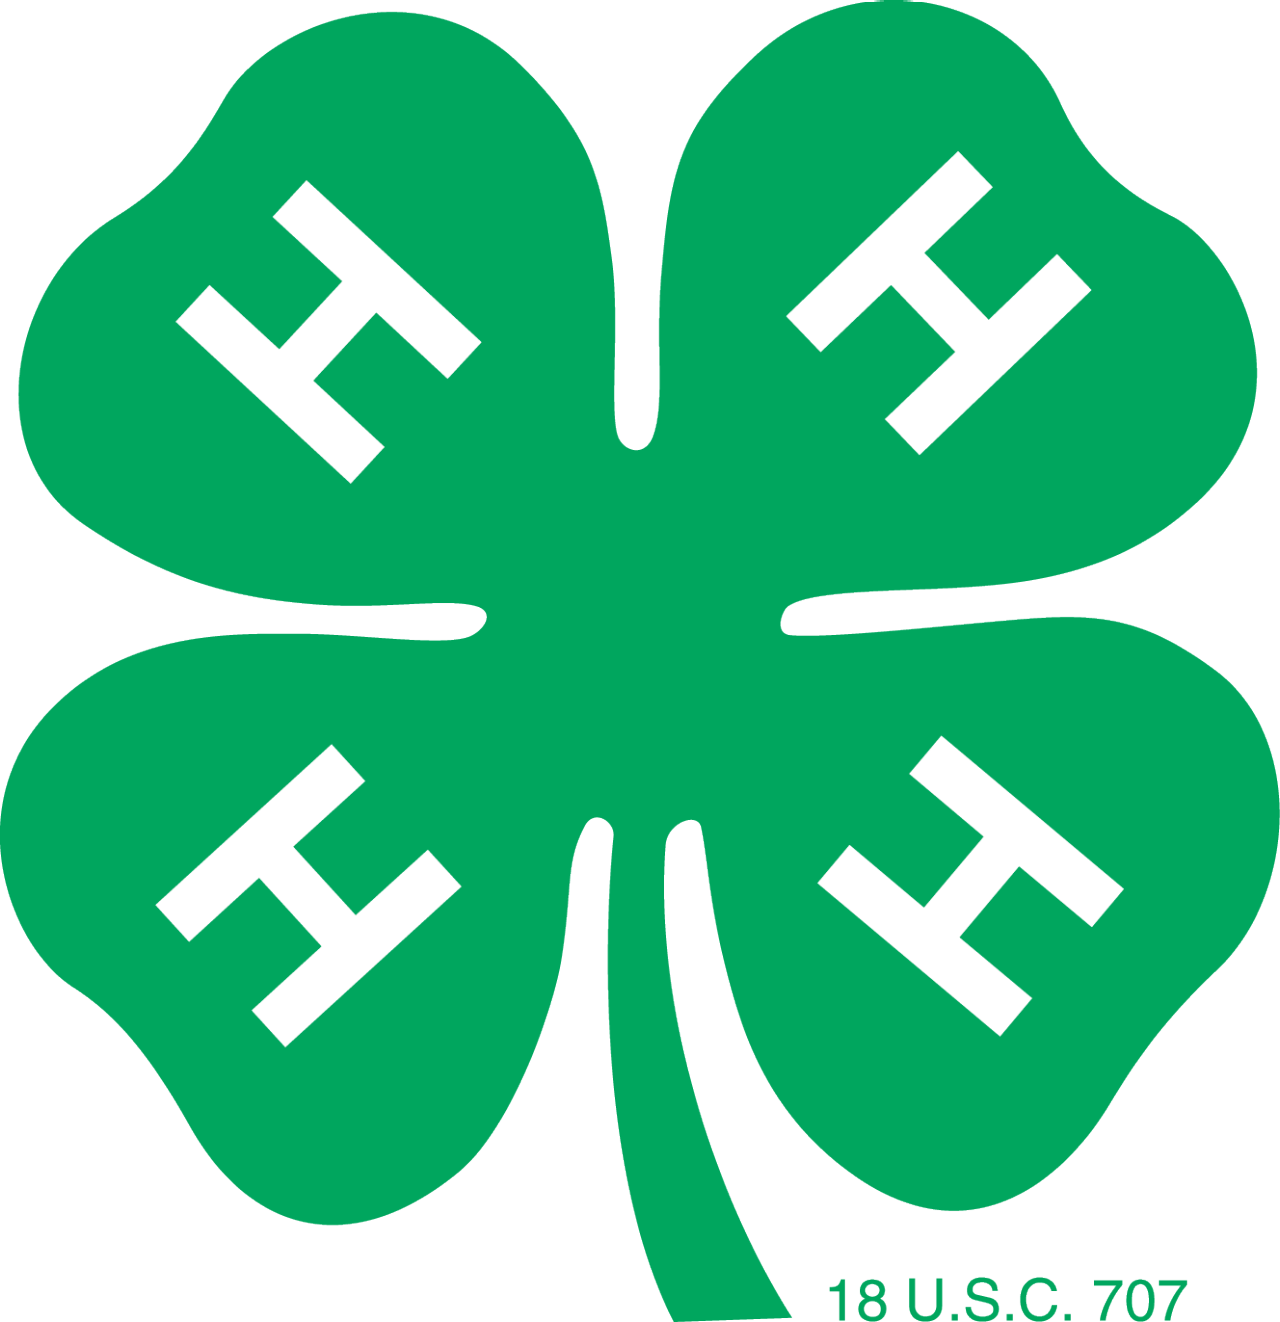 4-H green clover logo with and H on each leaf.